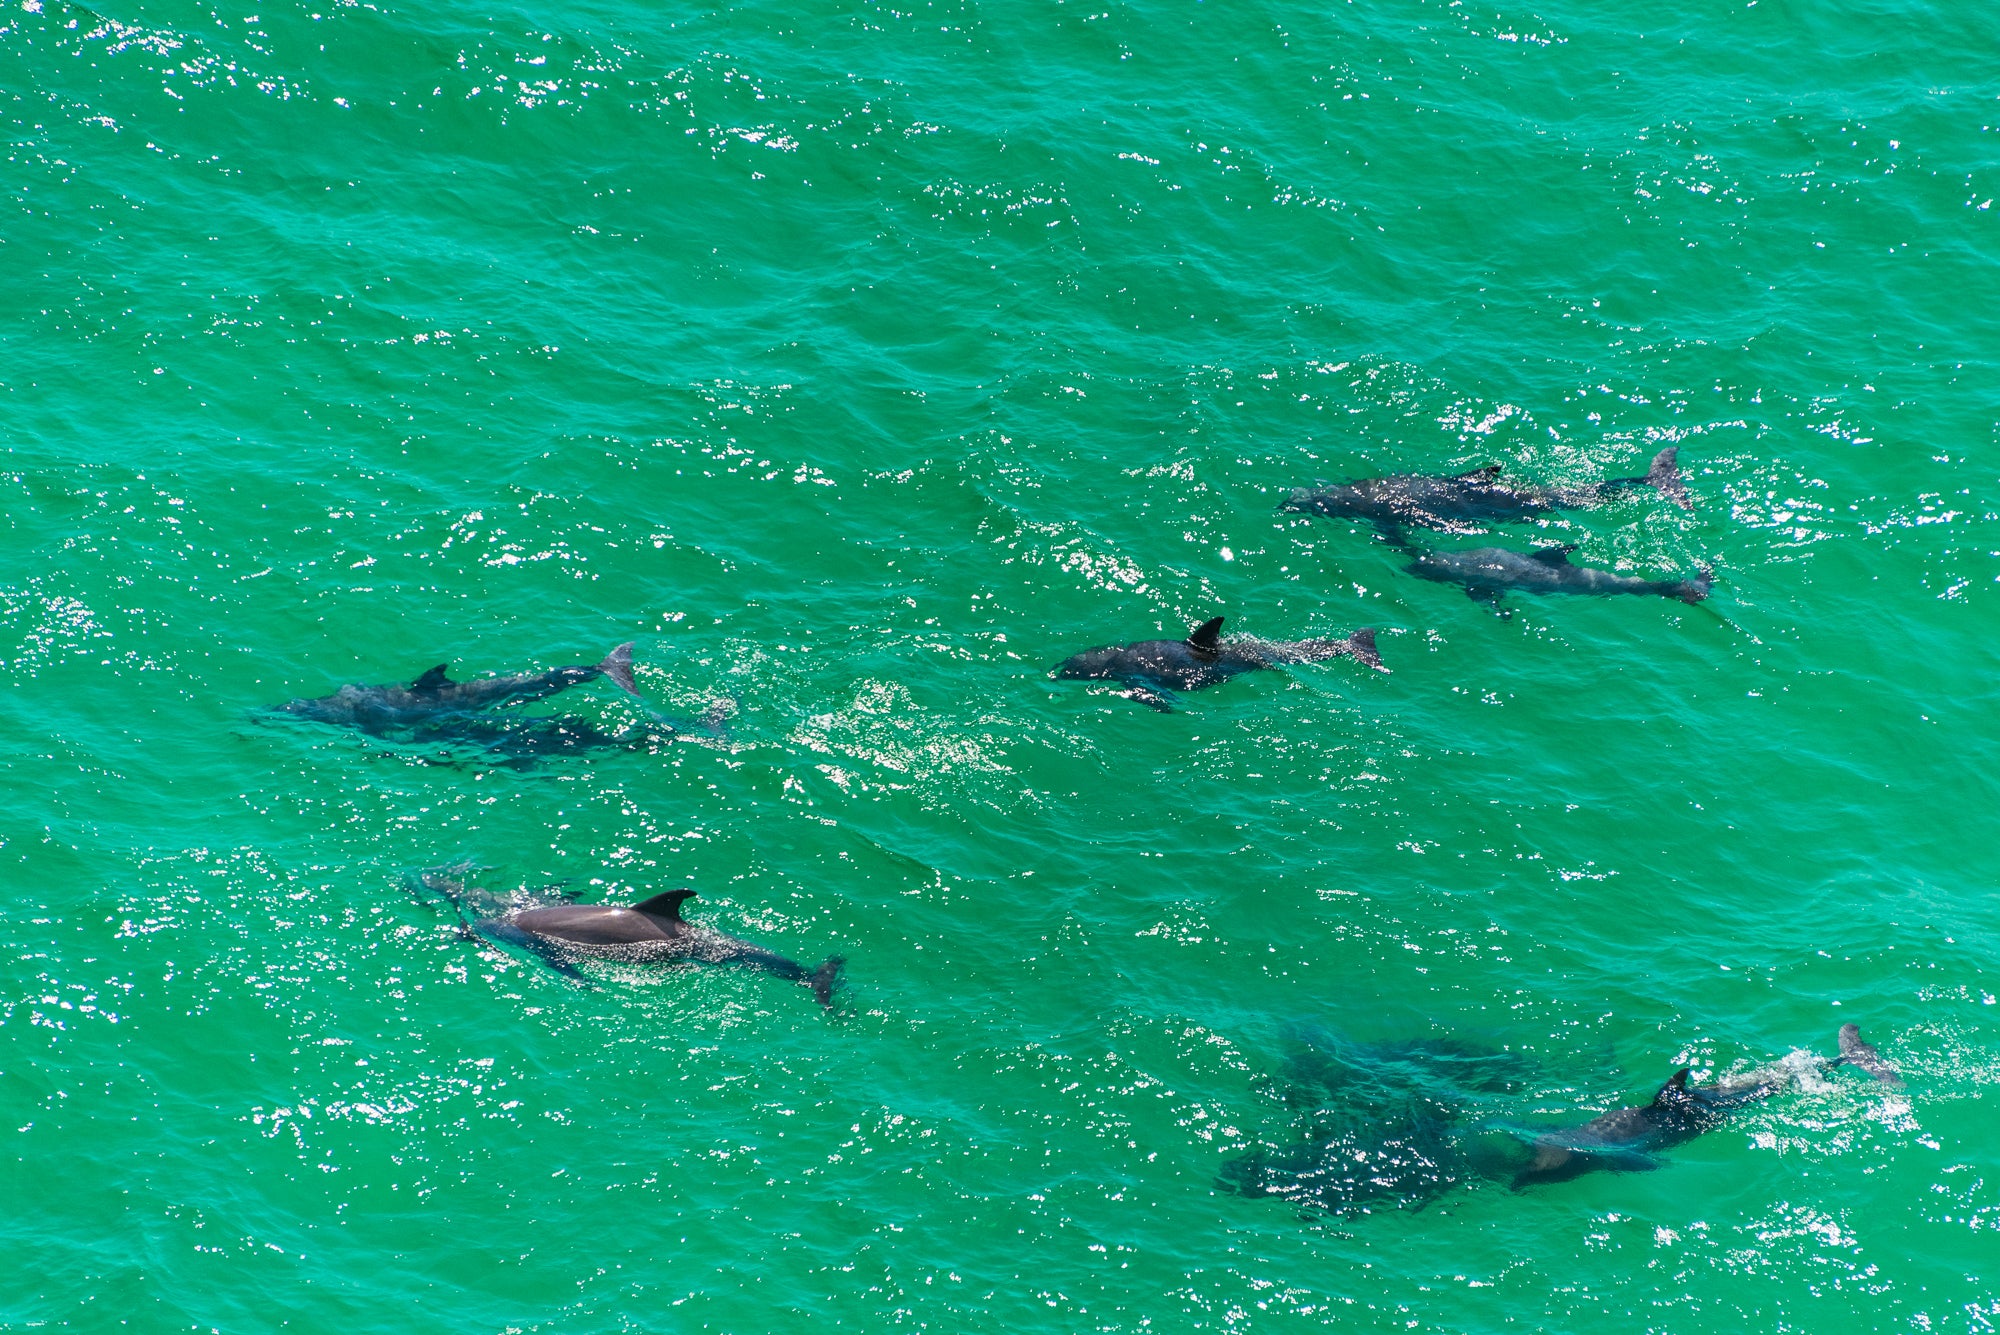 Dolphins at play in the Gulf Waters